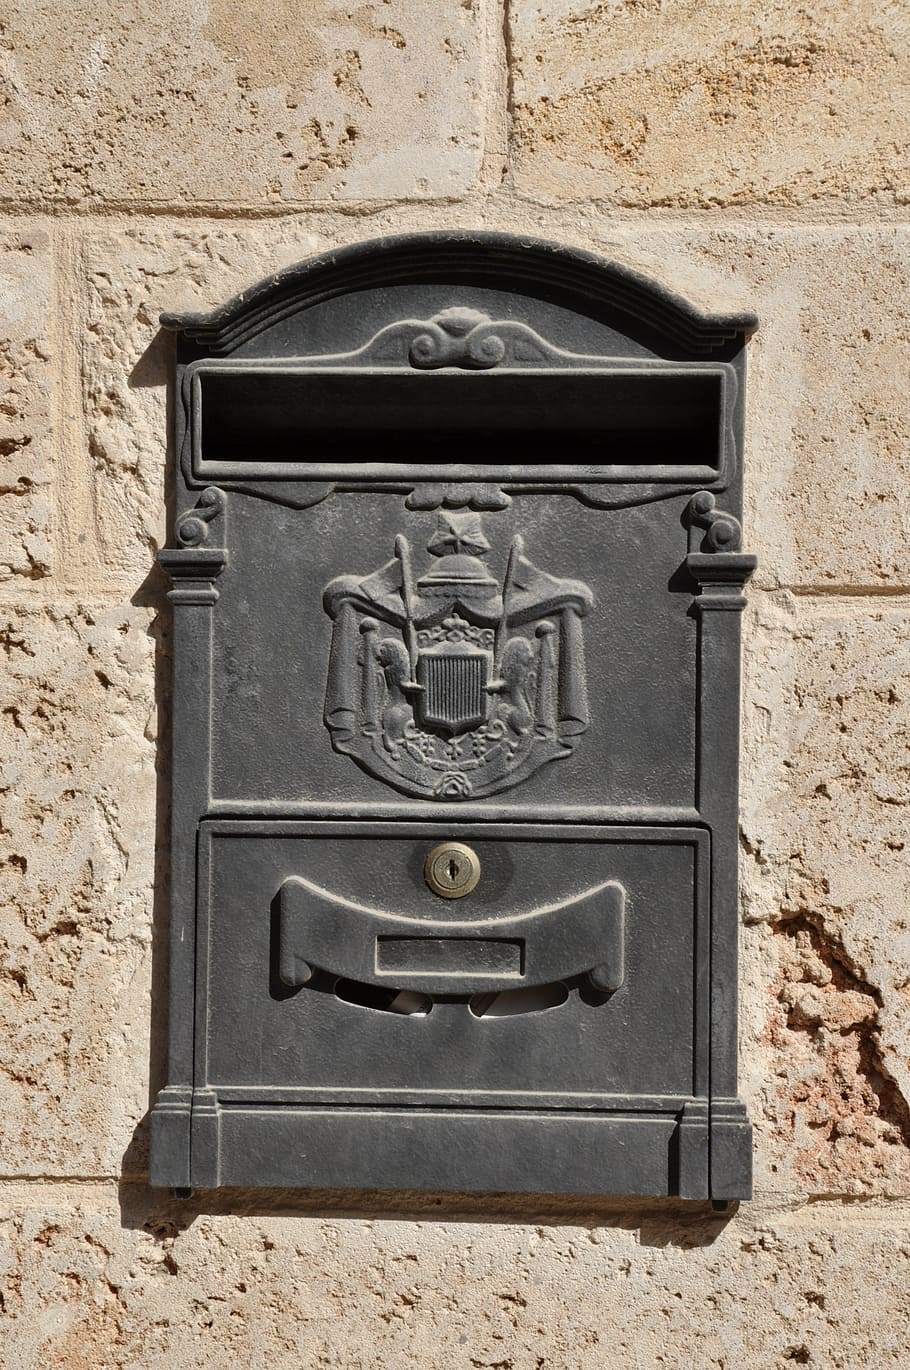 mailbox, mail, send, communication, metal, post, grey, delivery, letterbox, architecture